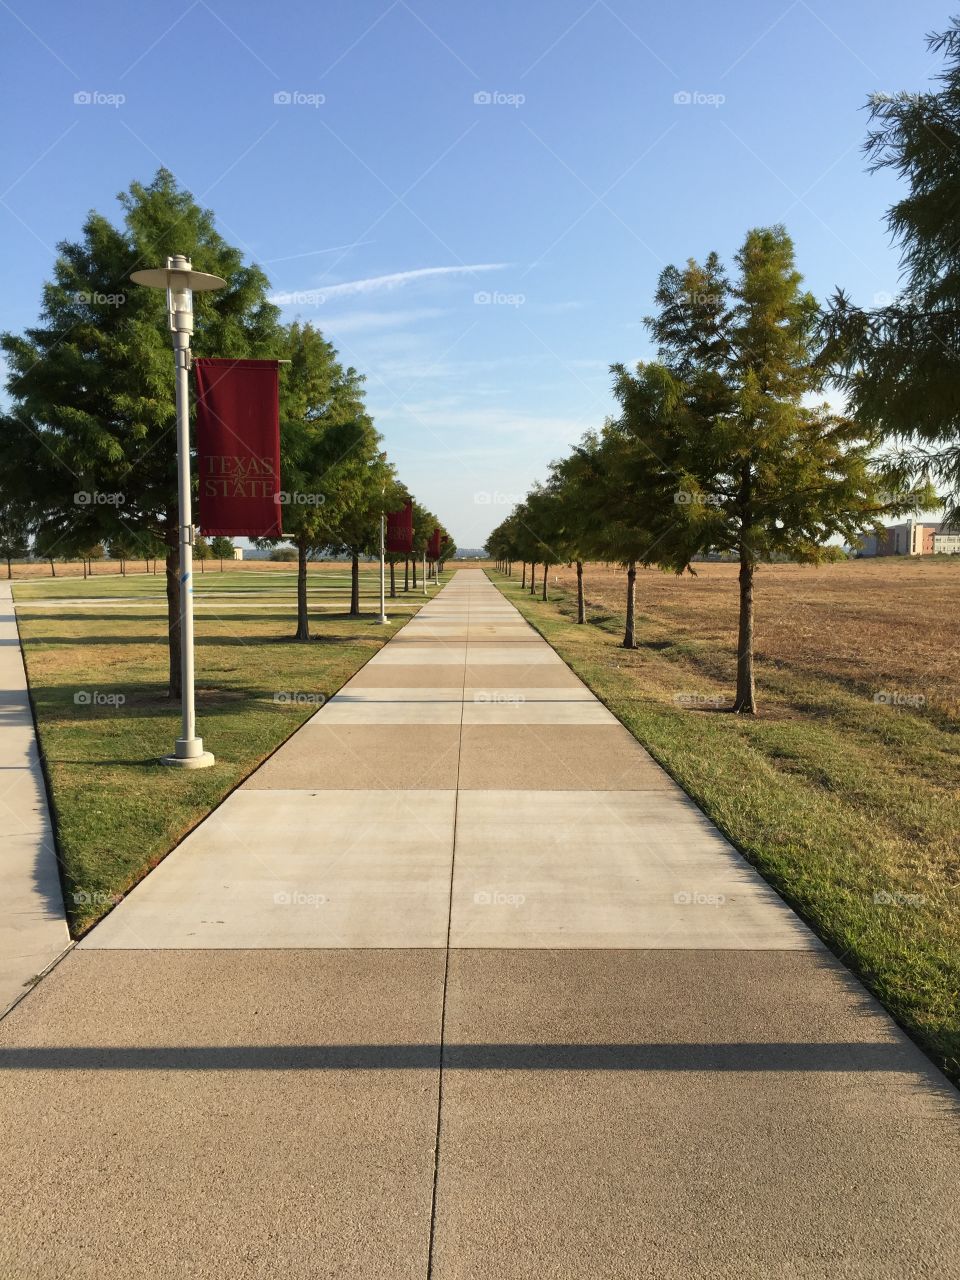 Walkway of the quad at Texas State University in Round Rock, Texas.